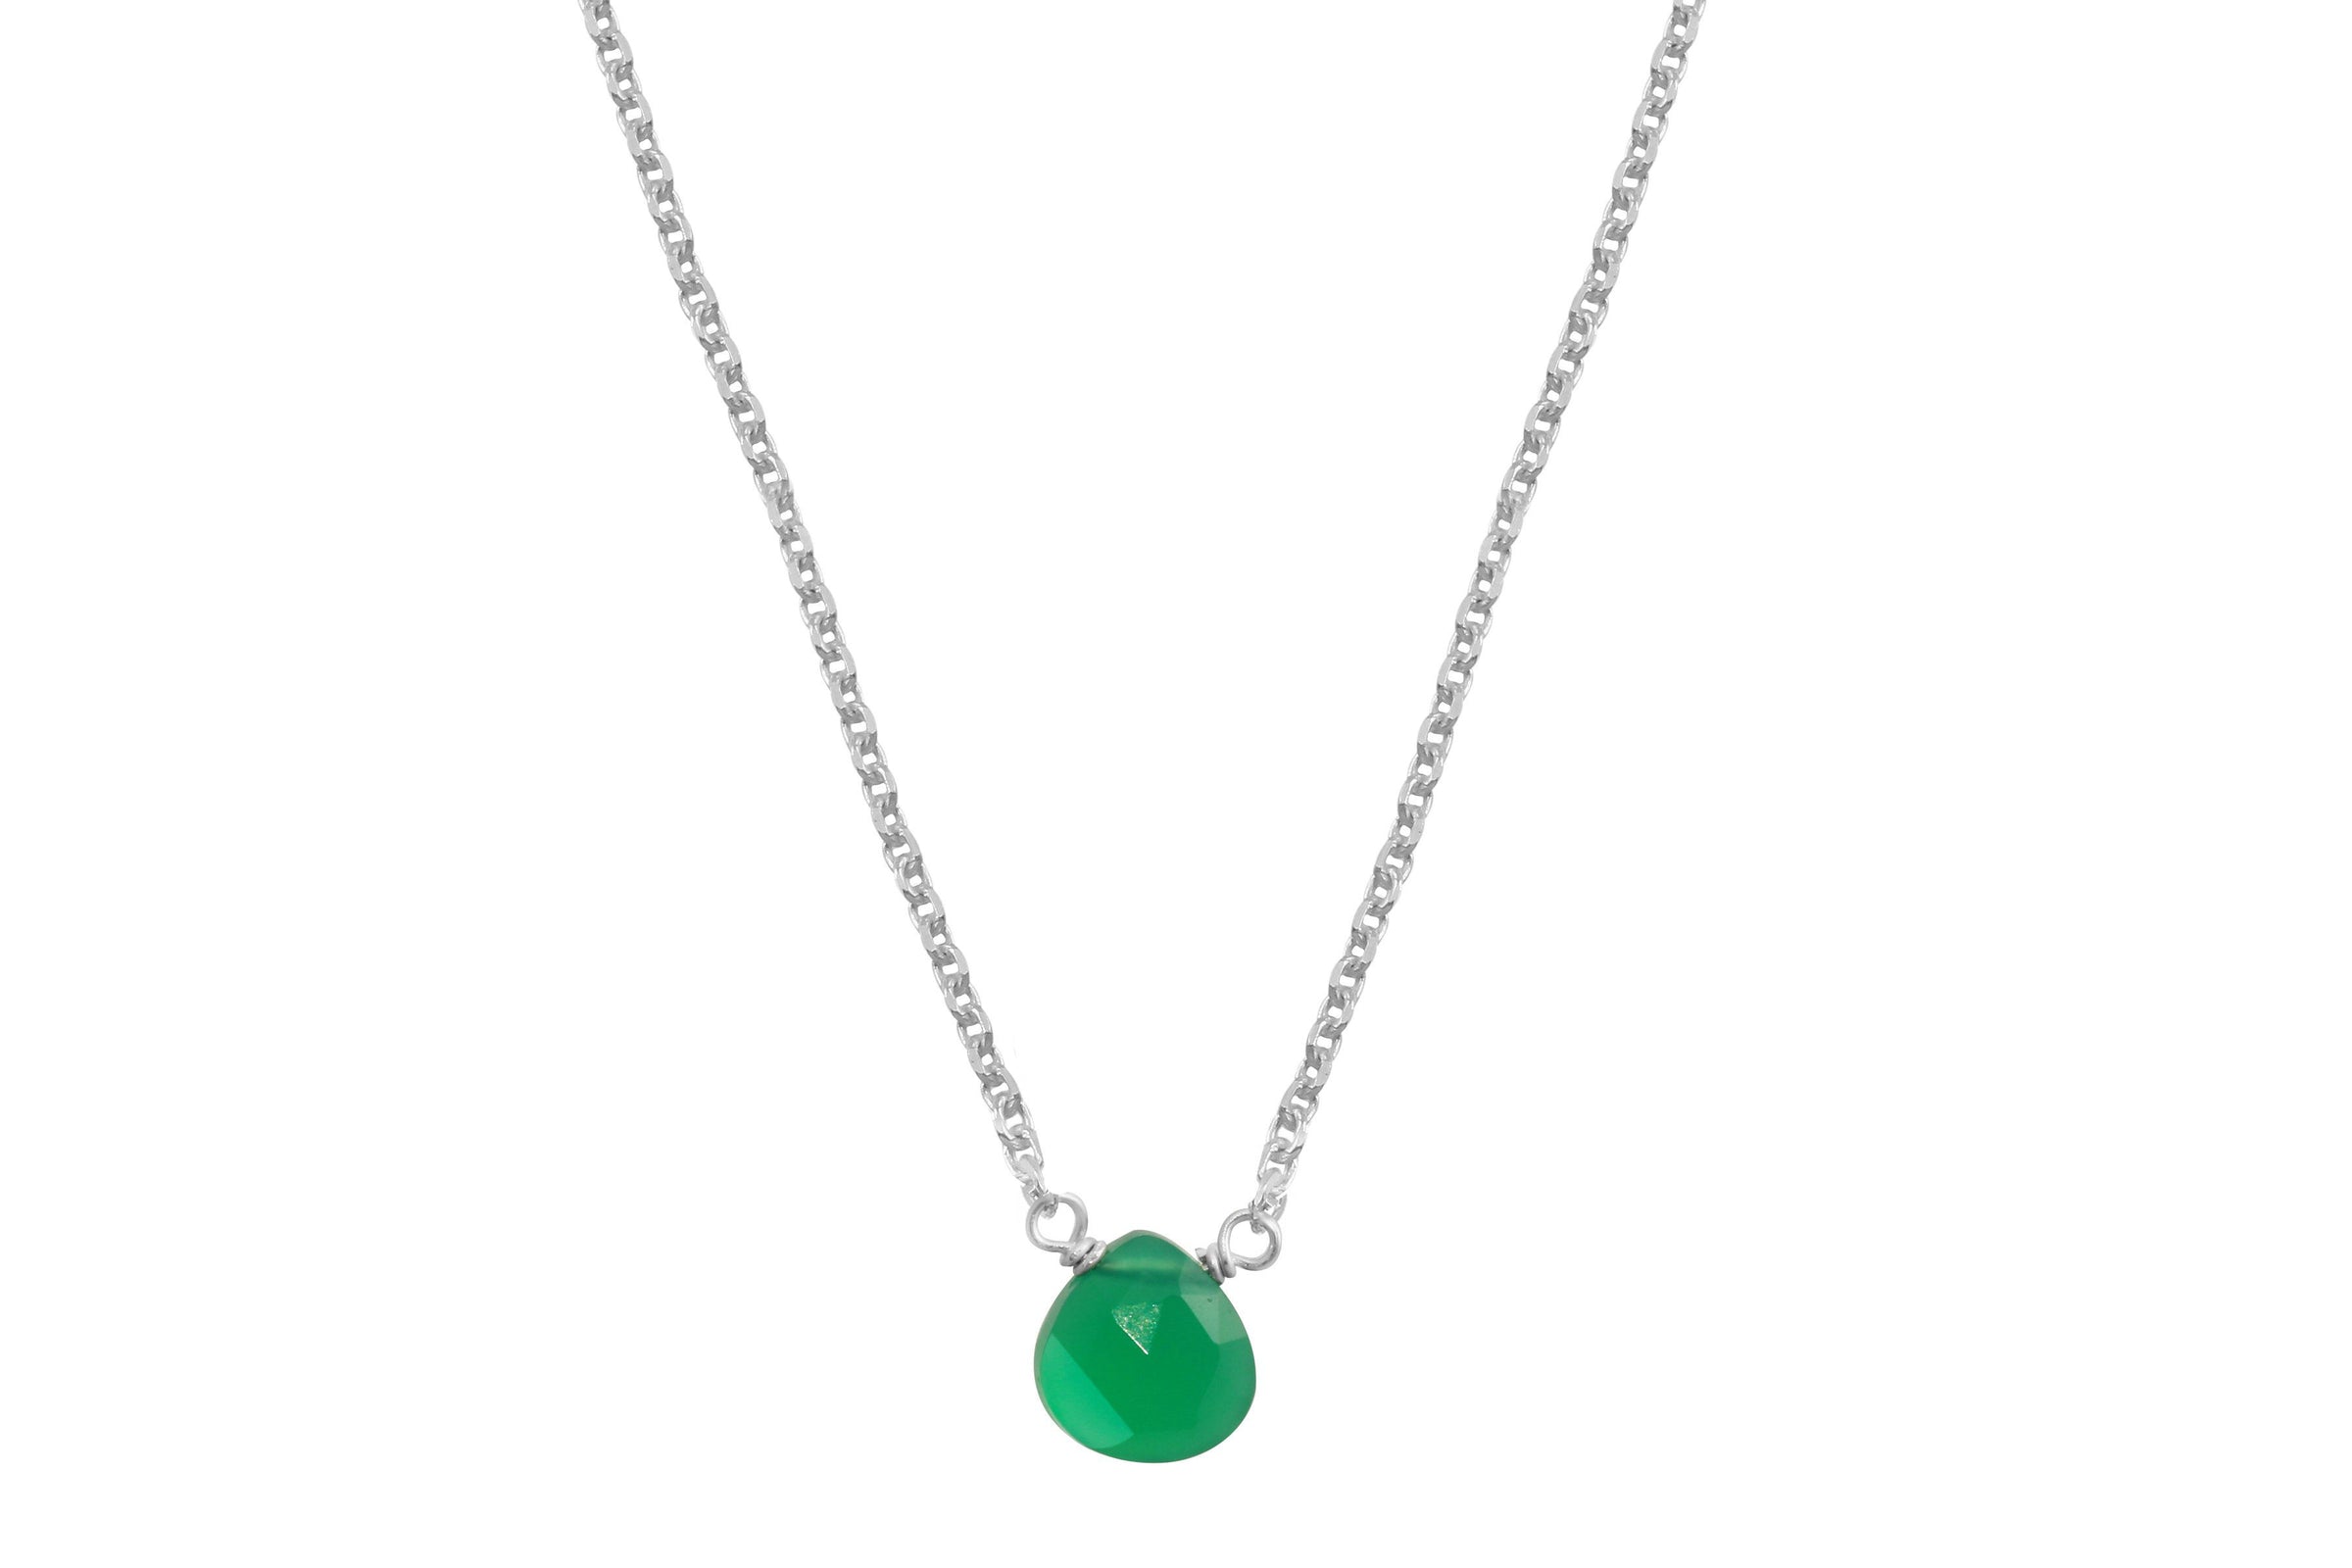 Green onyx little rock necklace - sterling silver or gold filled necklace Amanda K Lockrow 